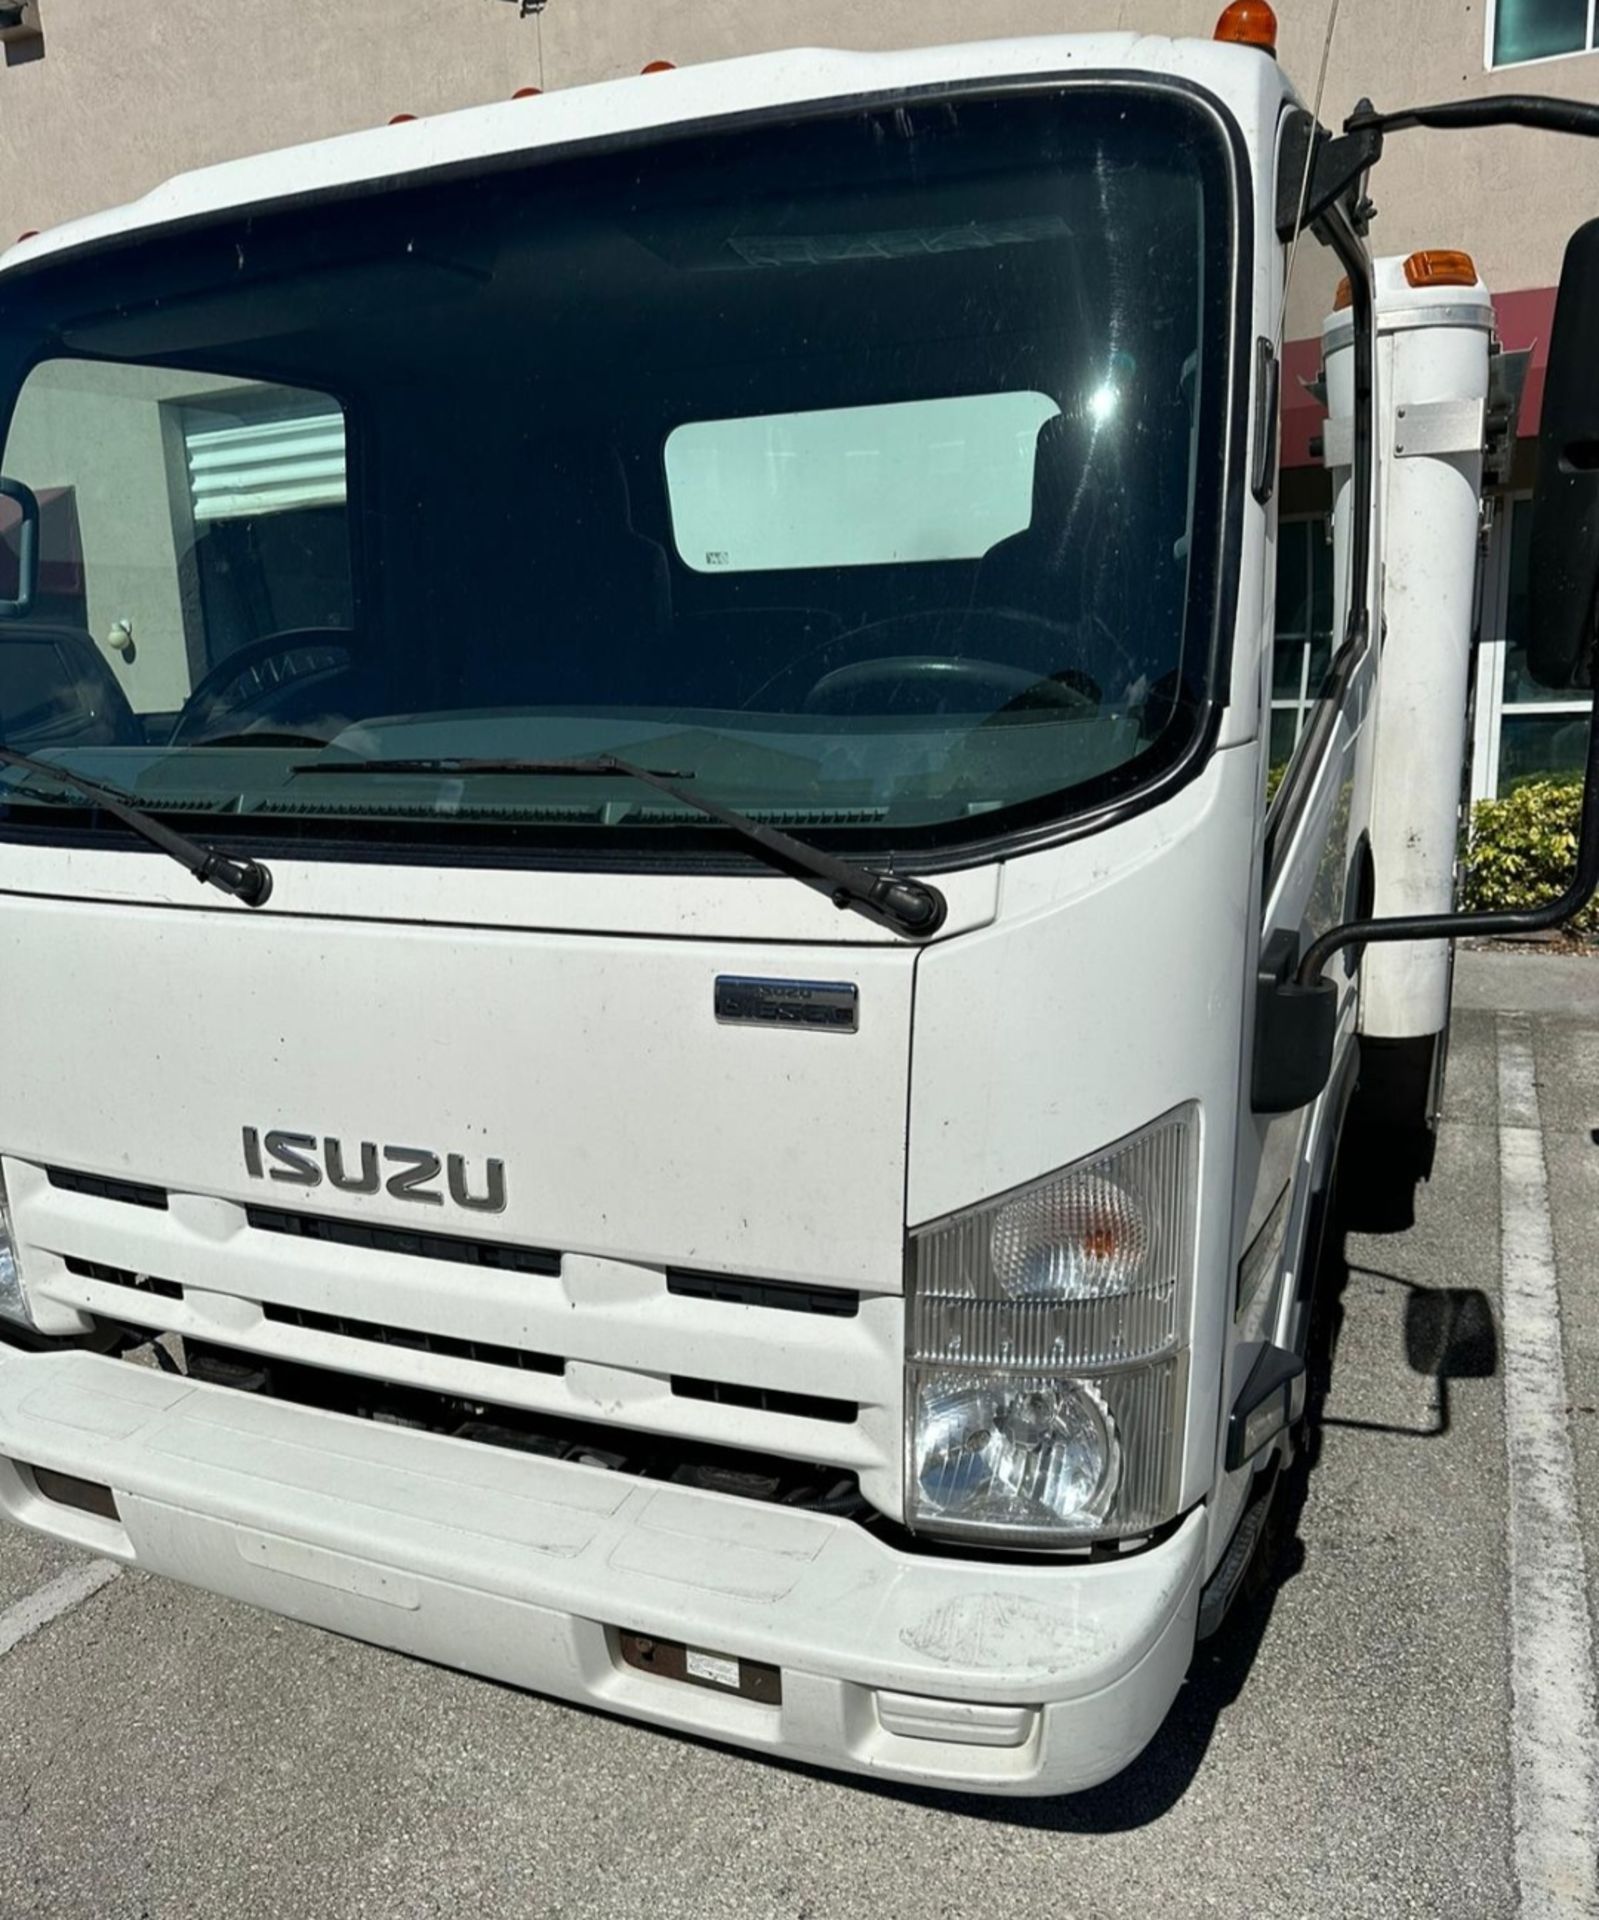 2013 Isuzu NPR Diesel Automatic, Includes: Johnson Refrigeration Body with Cold Plate System